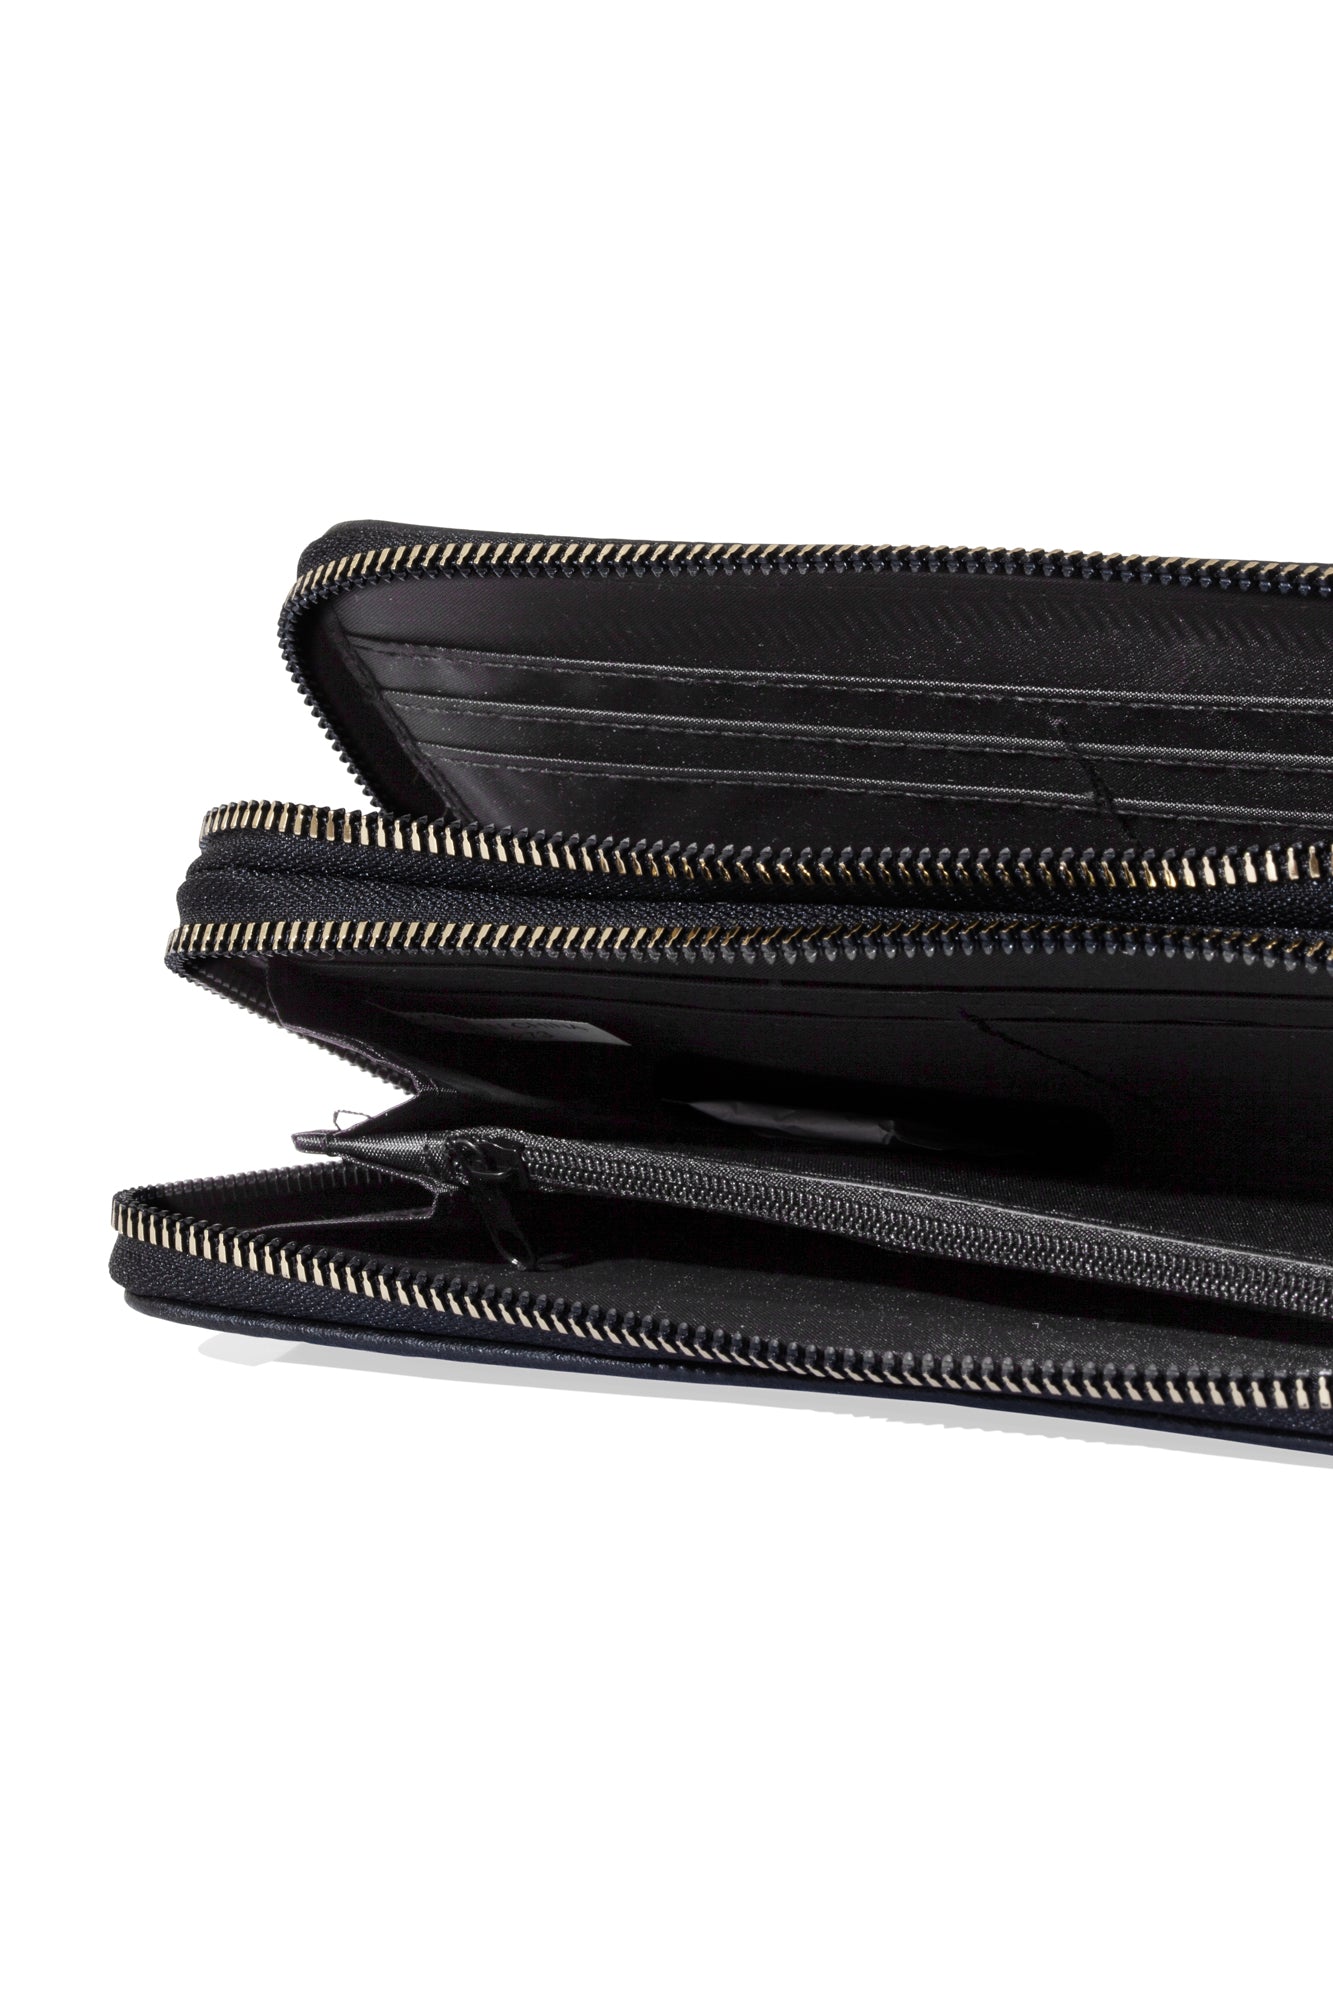 Pockets of black double zip wallet with gold zipper